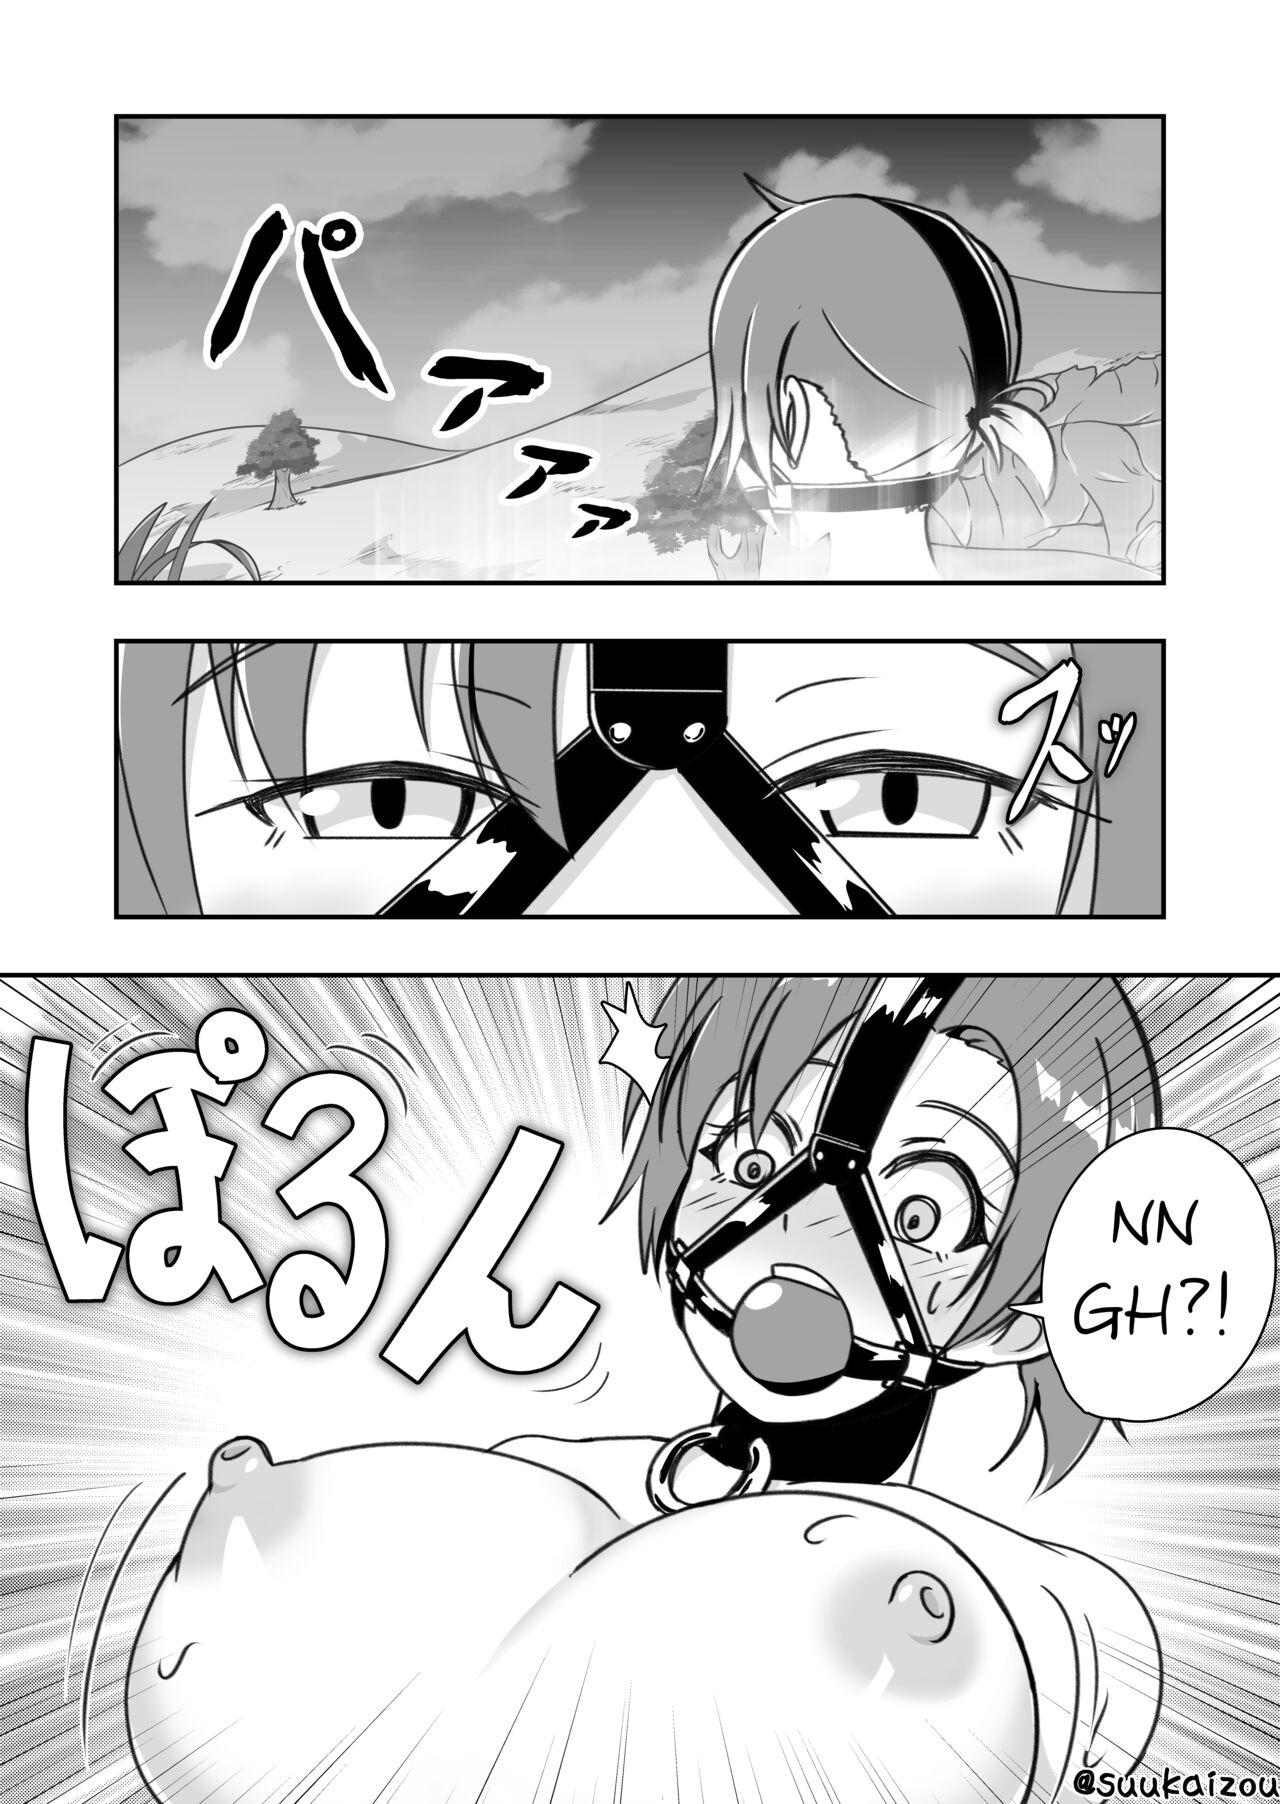 Boudica is trained by Shota 0